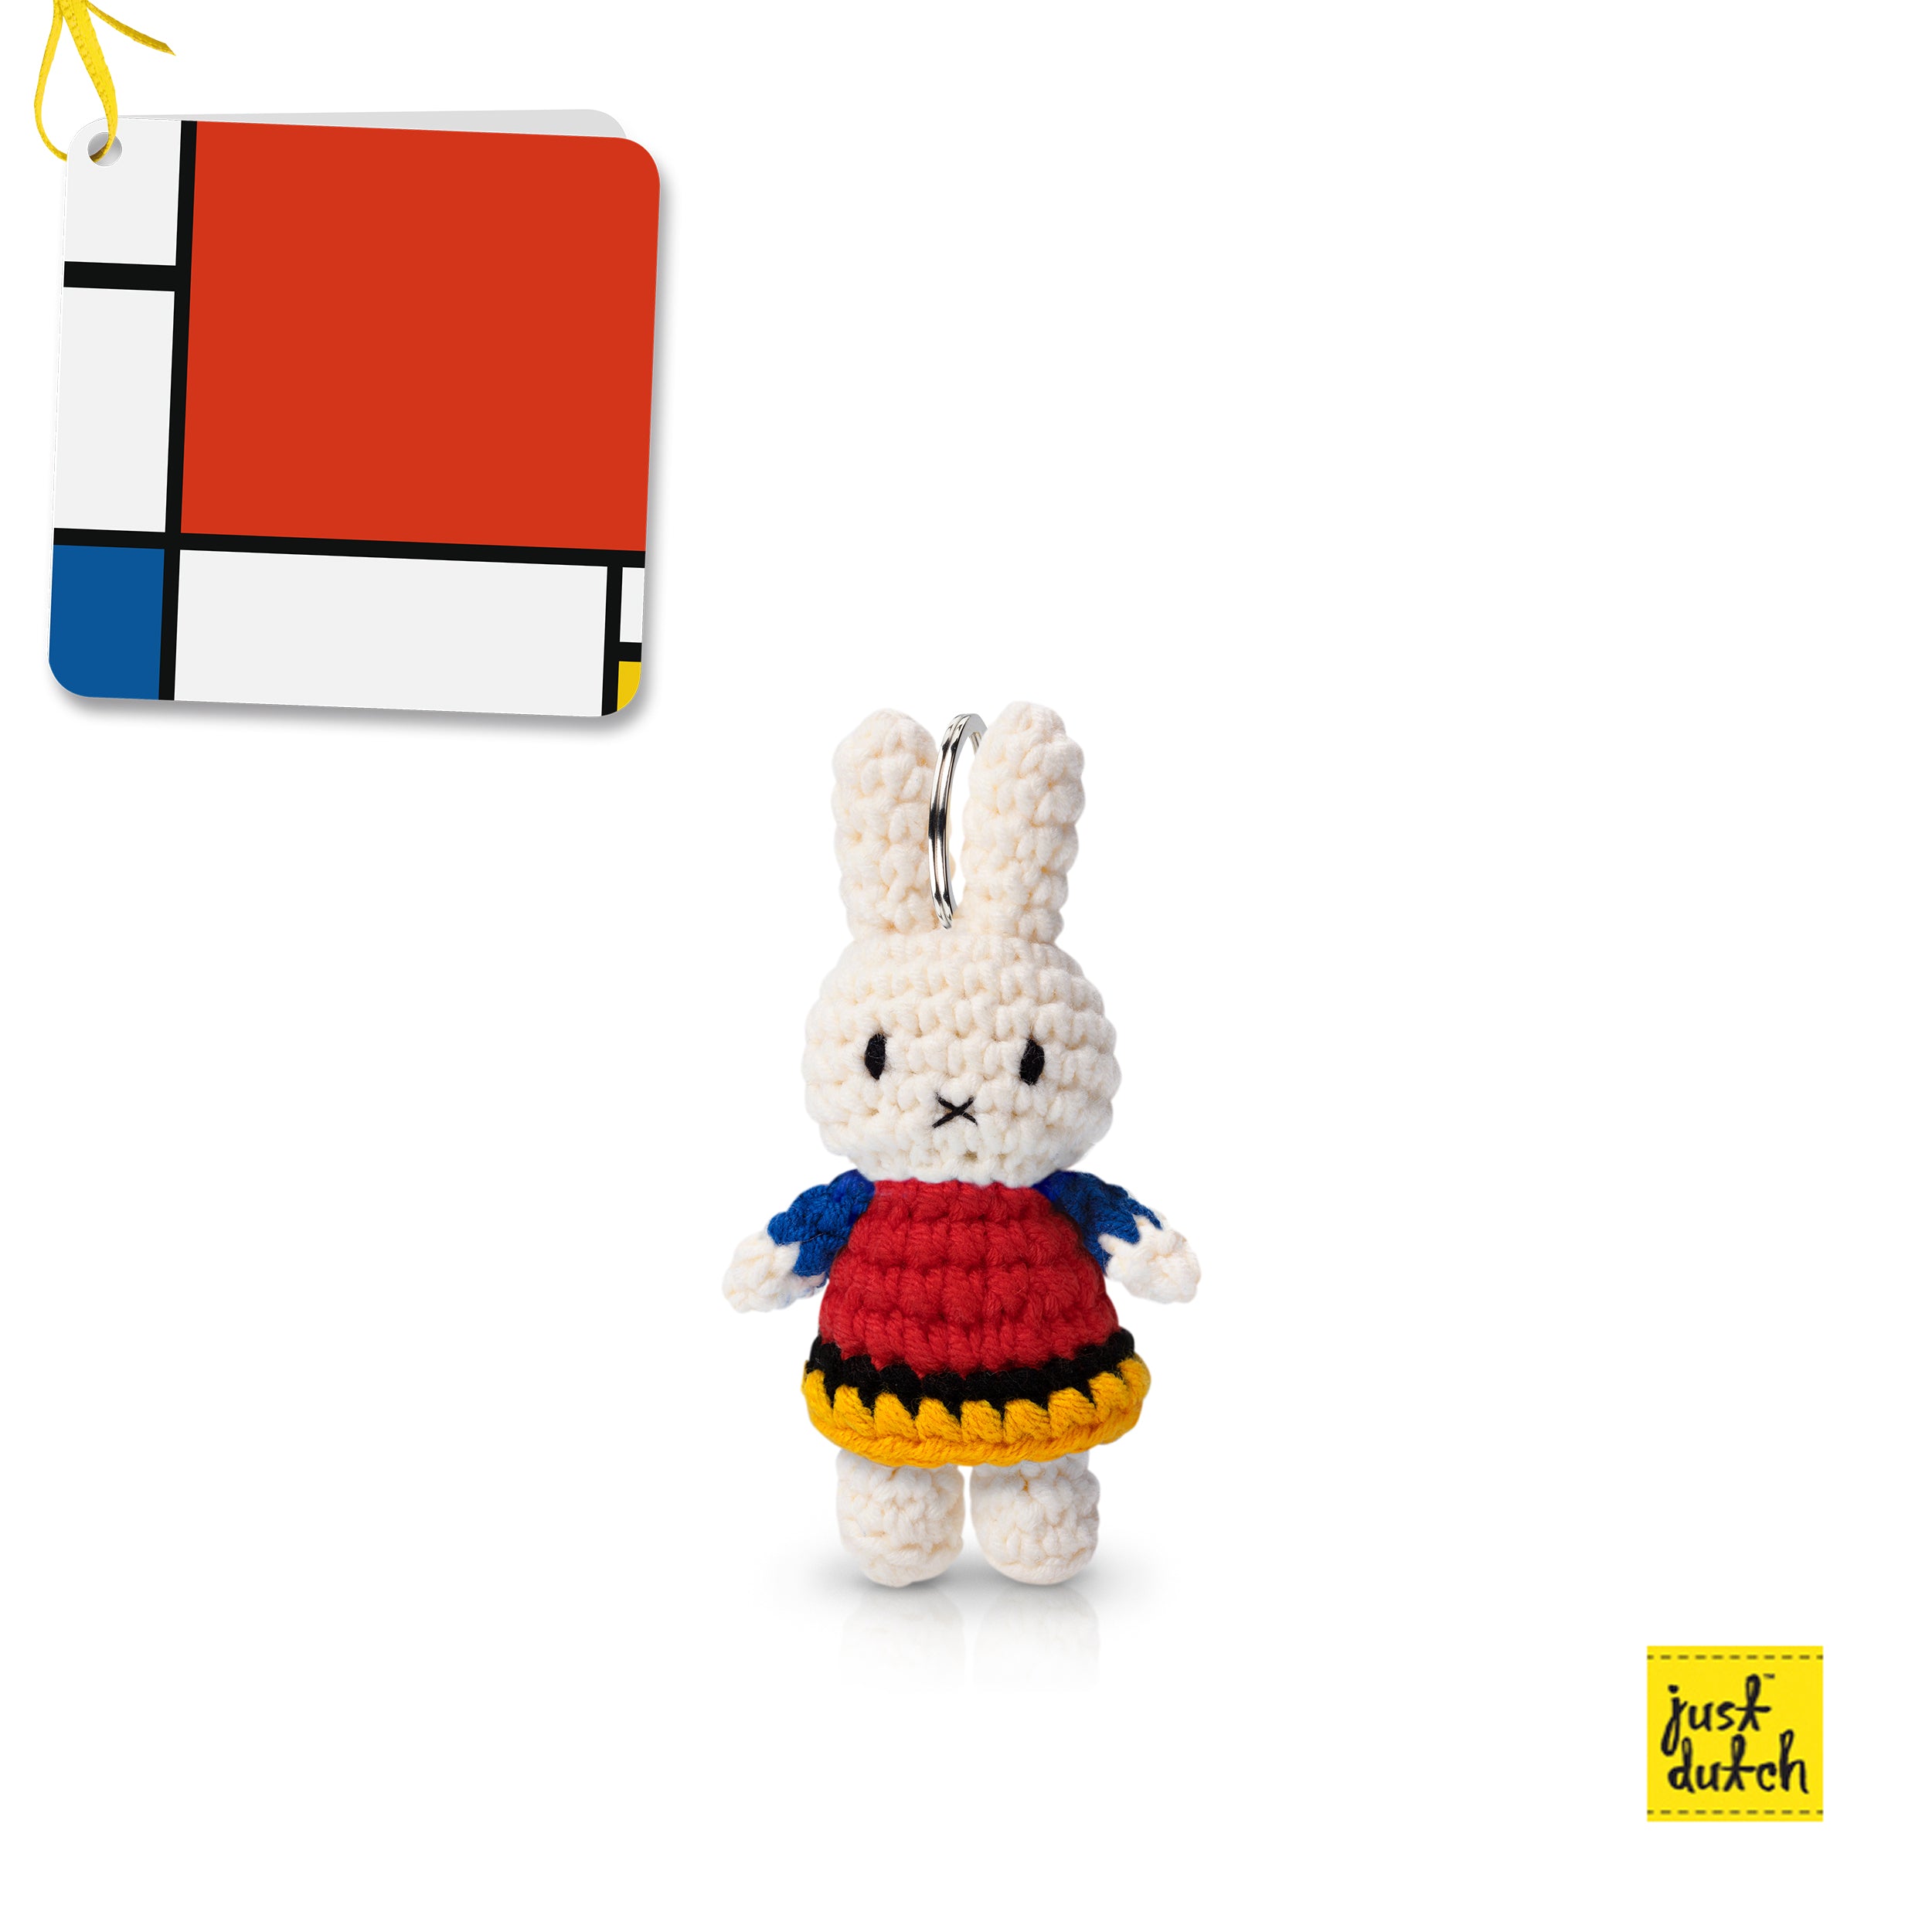 Keychain Miffy Lying Collection